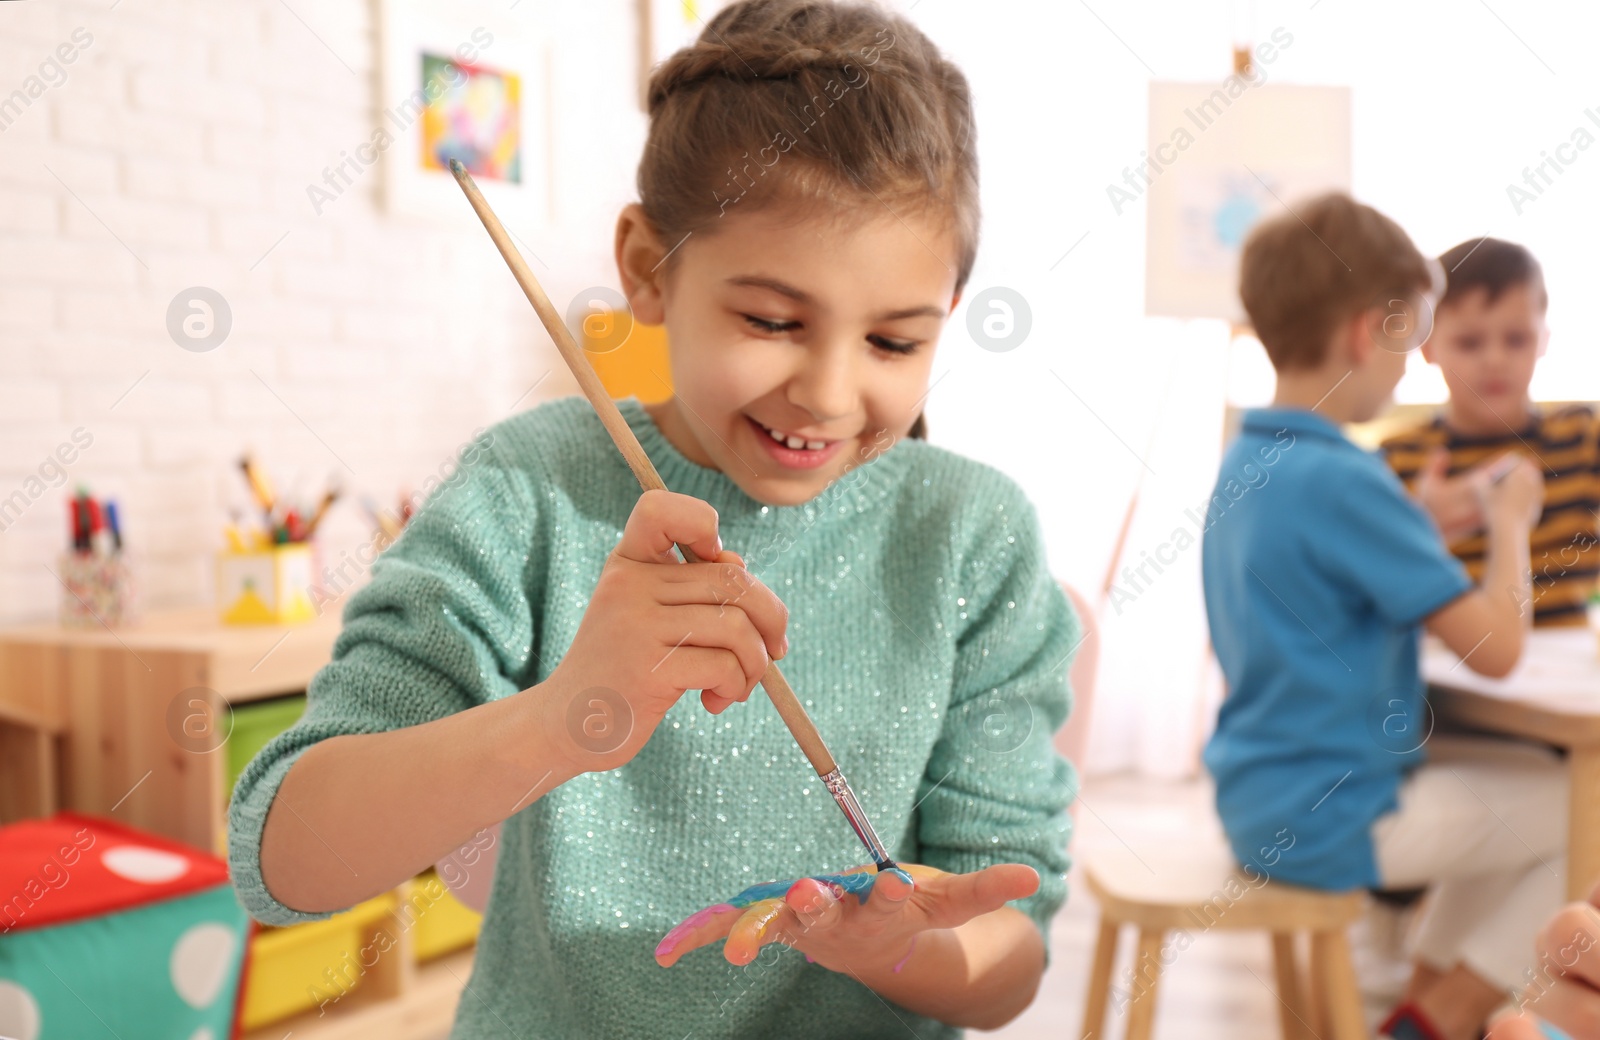 Photo of Cute little child painting her palm at table in room